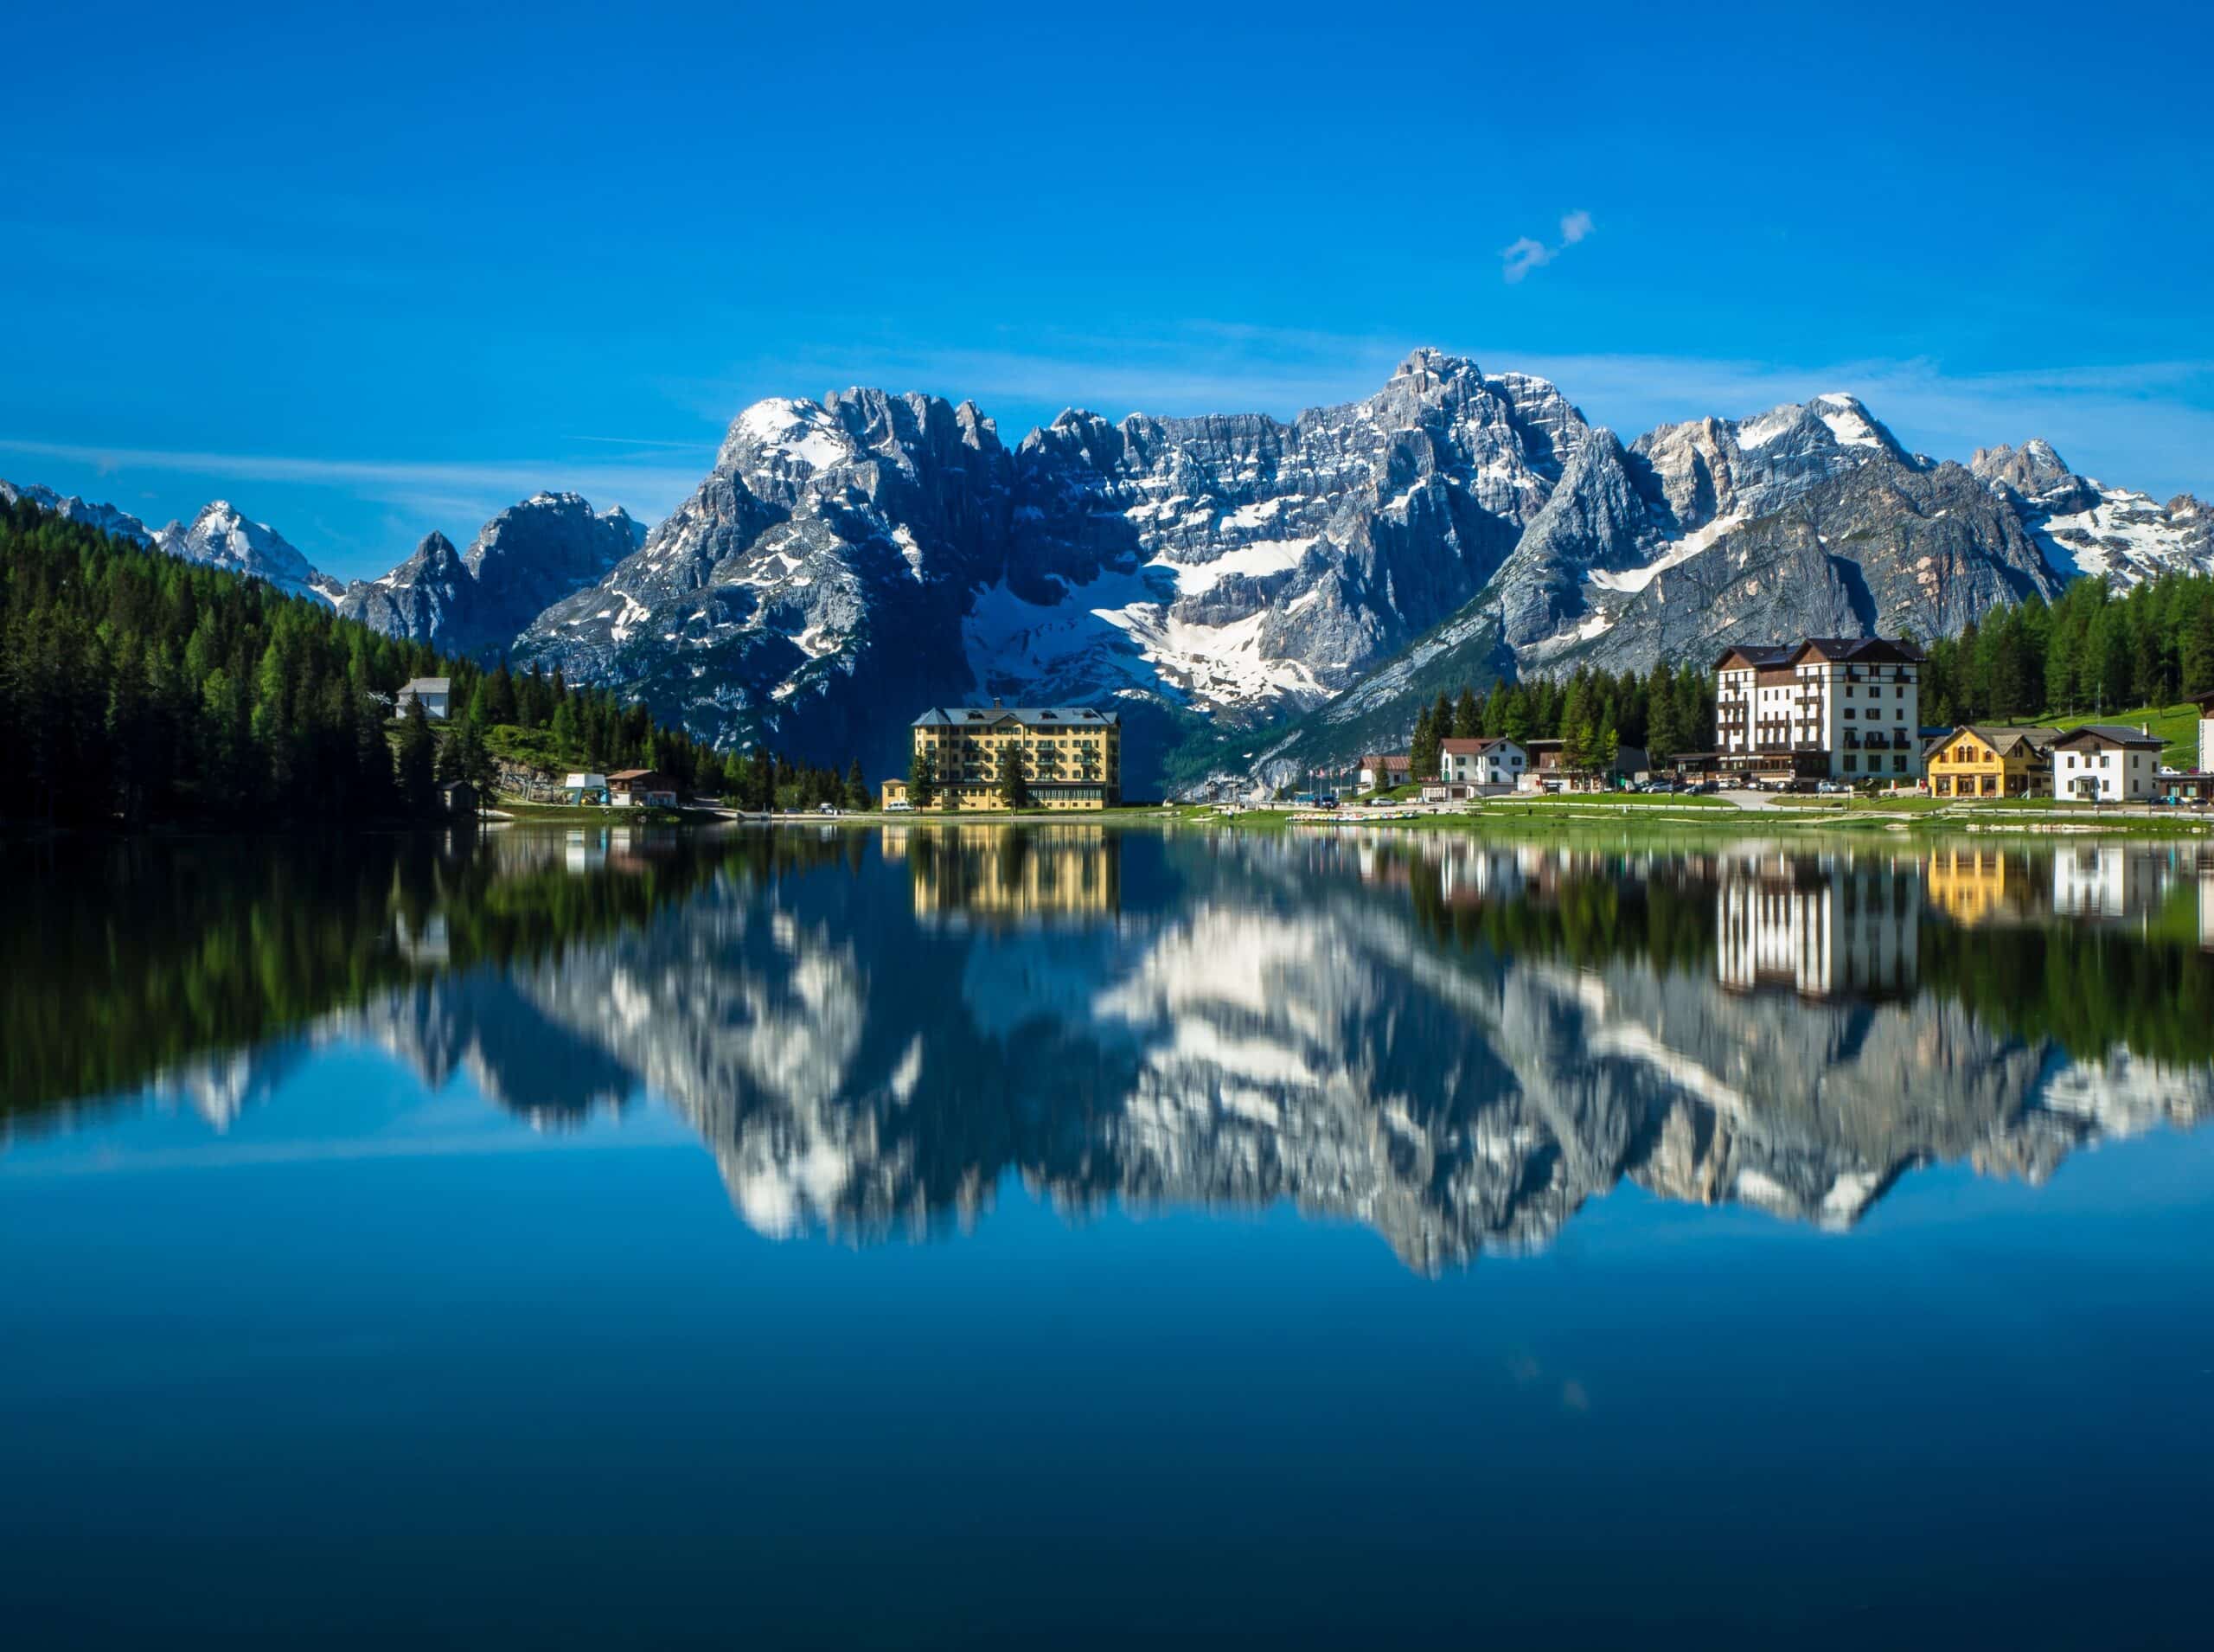 A lake with mountains reflected in it.